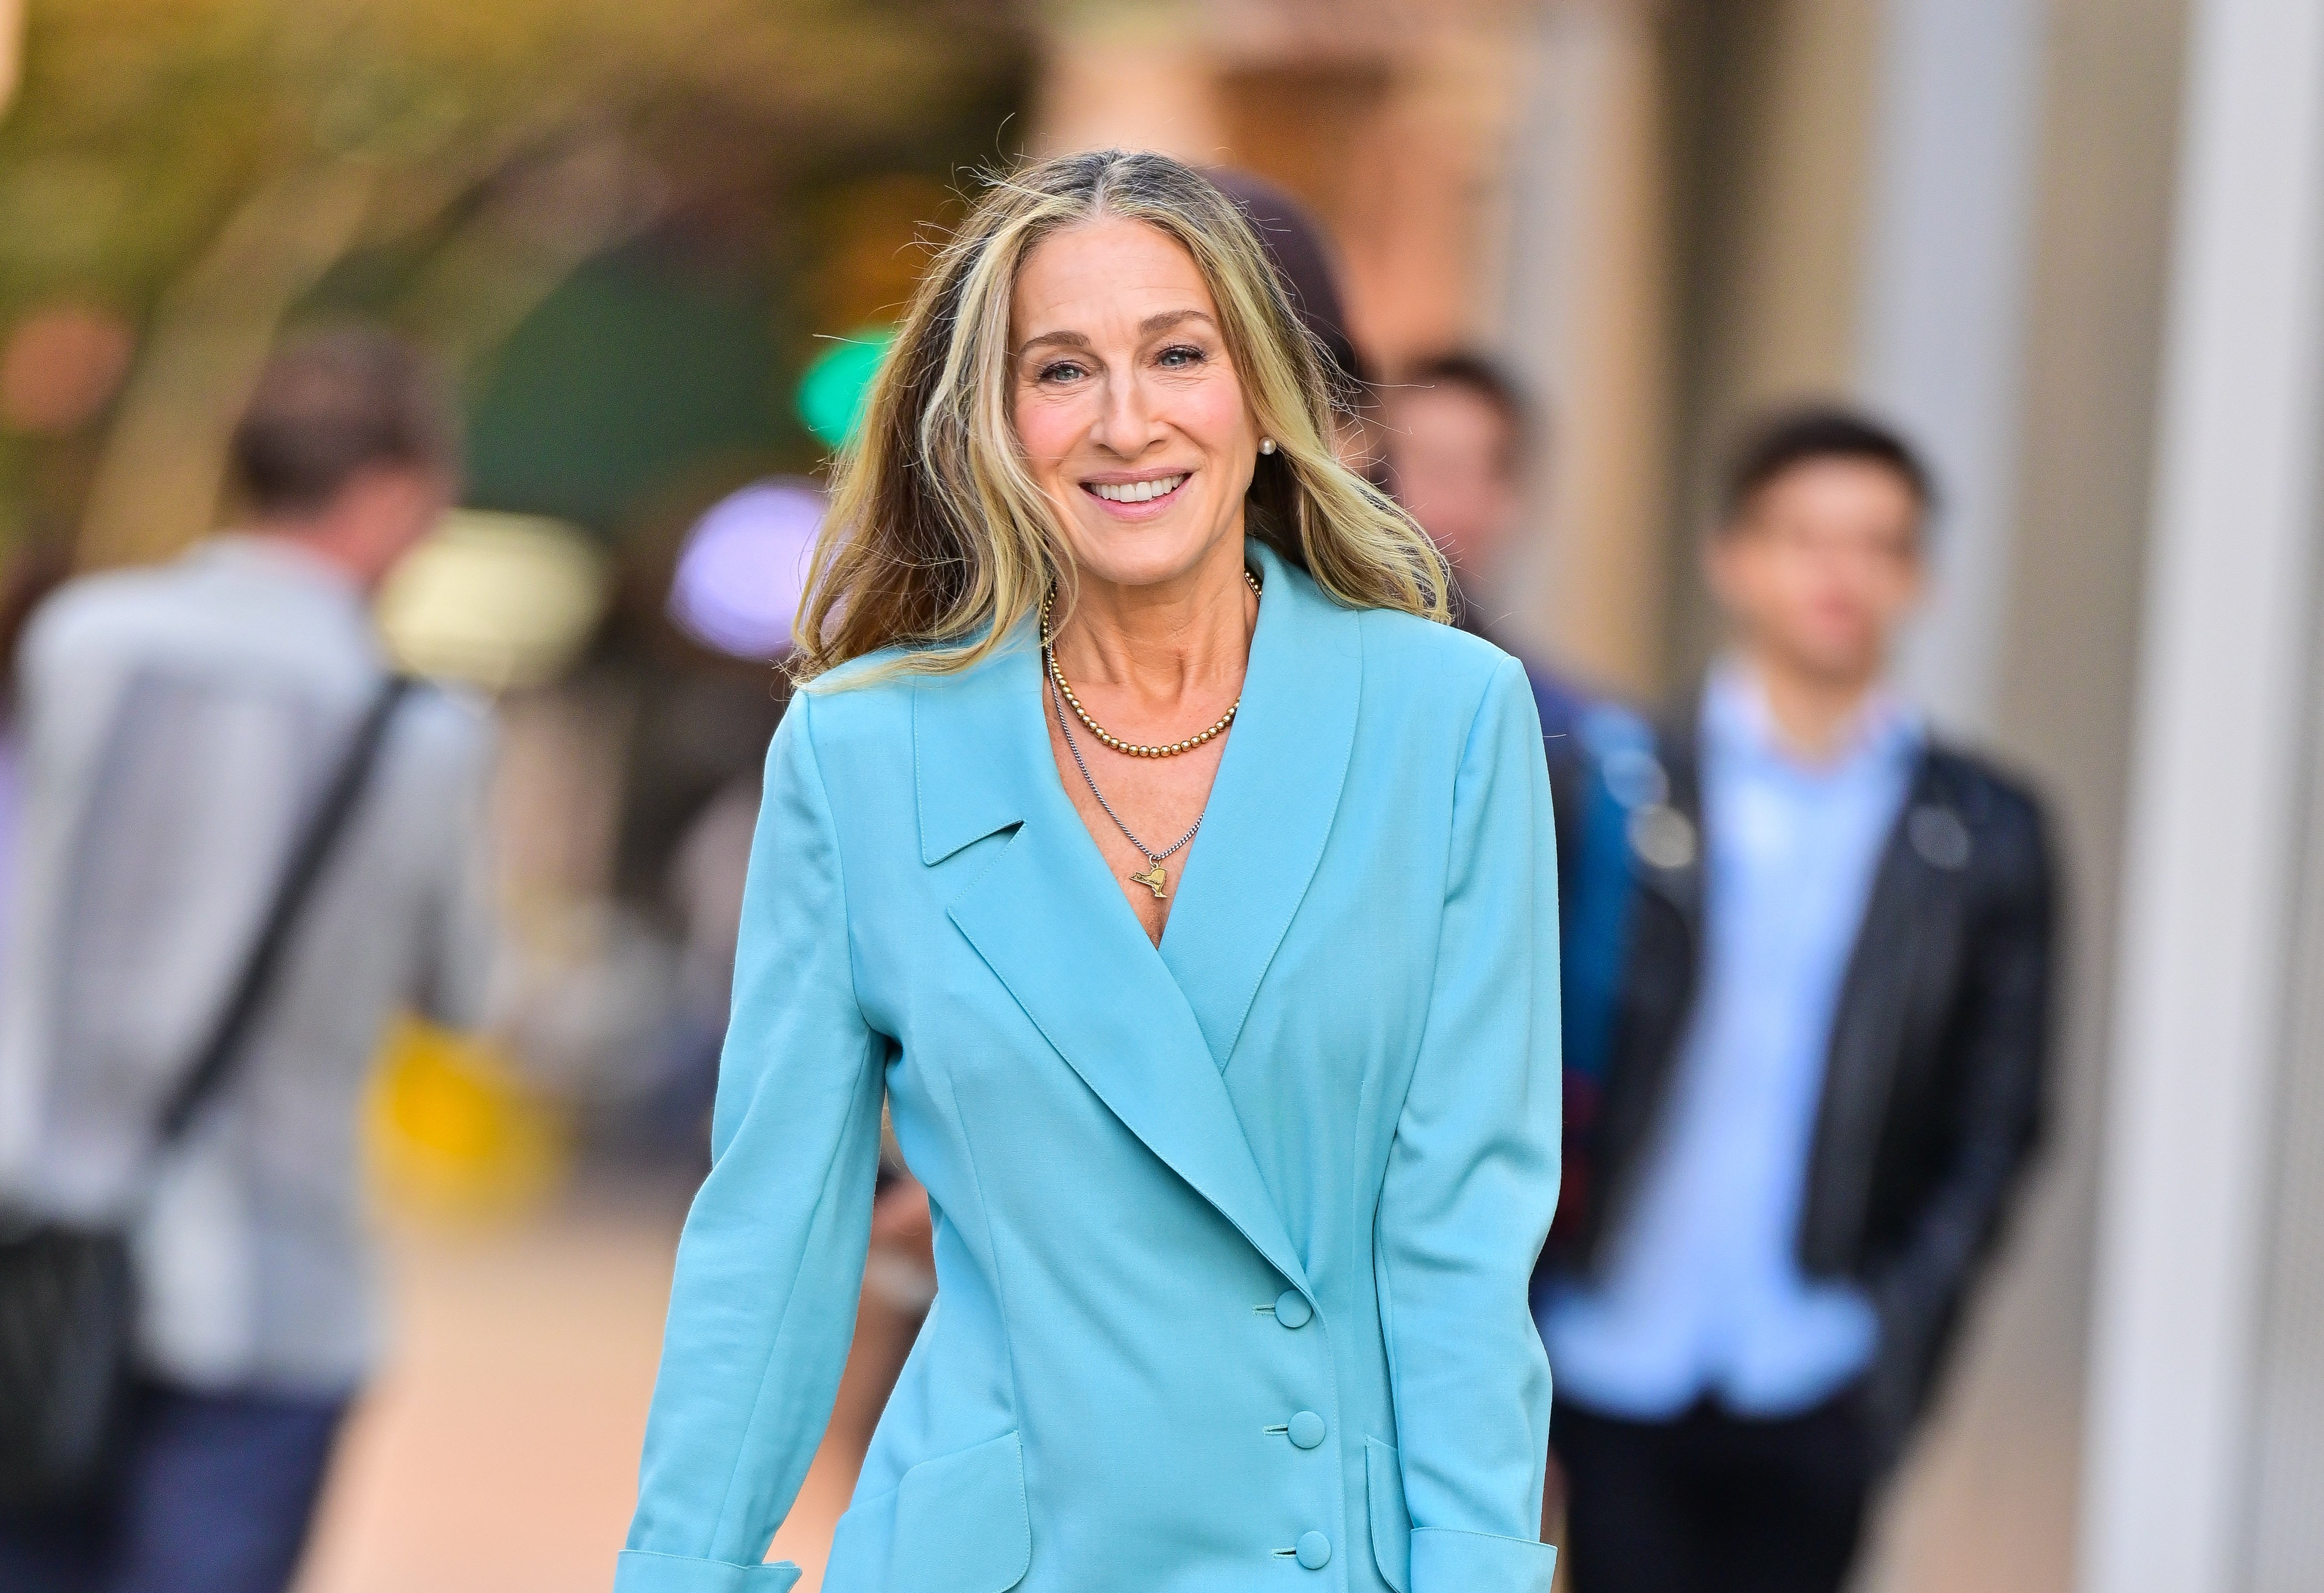 Sarah Jessica Parker seen on the set of "And Just Like That..." the follow up series to "Sex and the City" in the West Village on November 1, 2021 in New York City. | Source: Getty Images